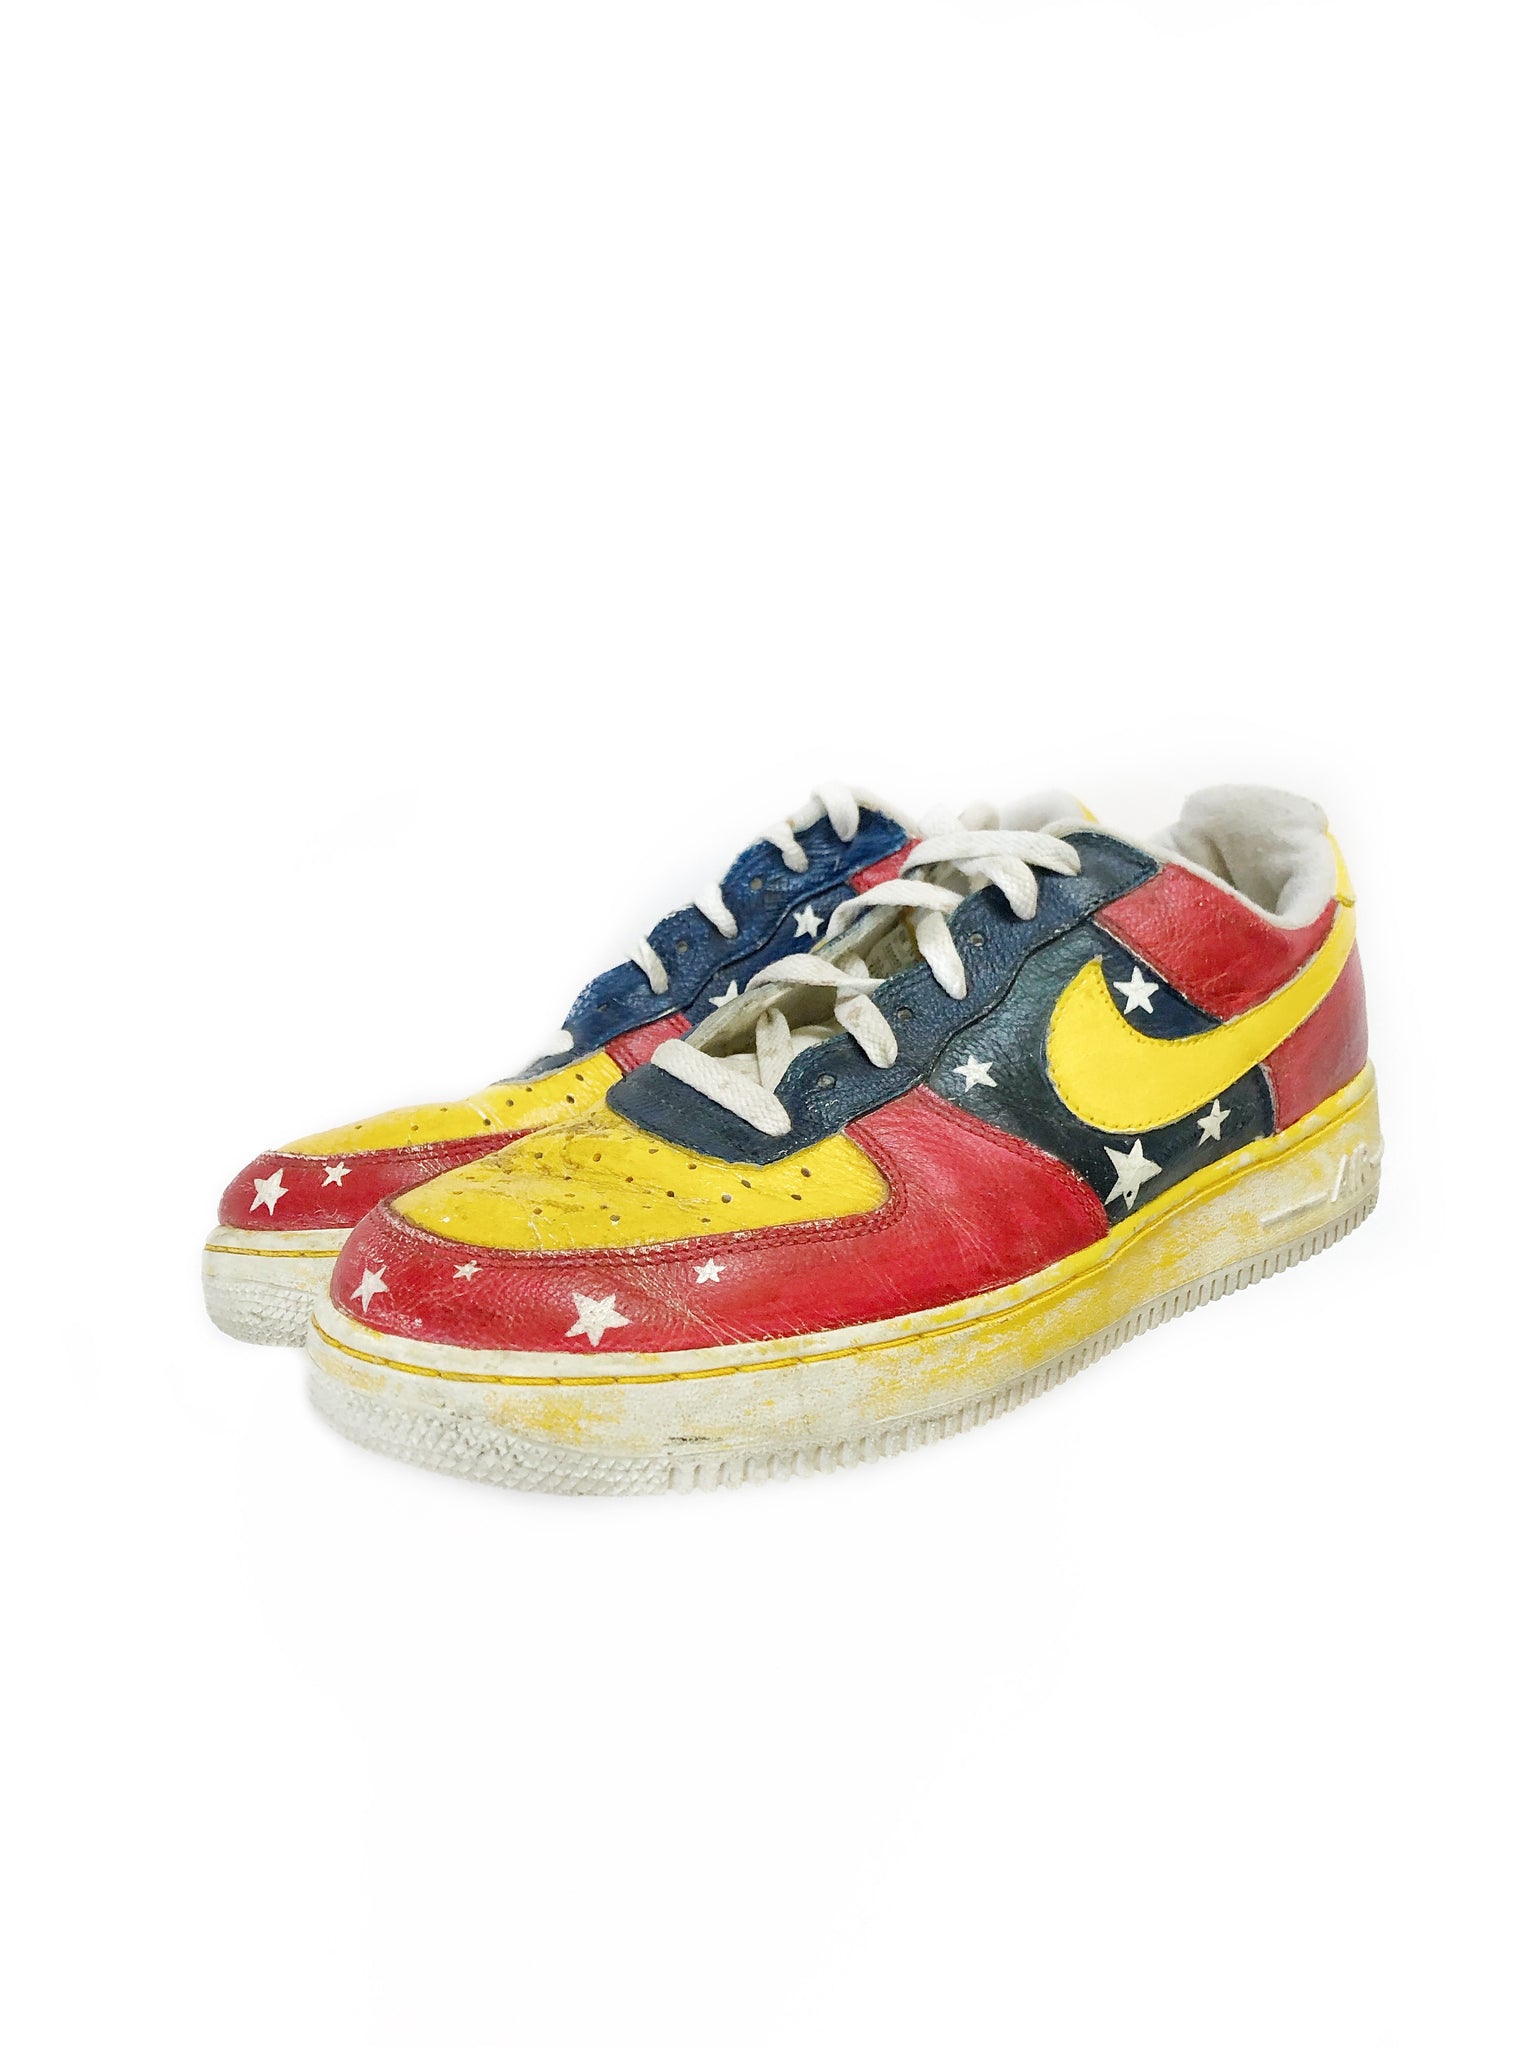 painted air force ones